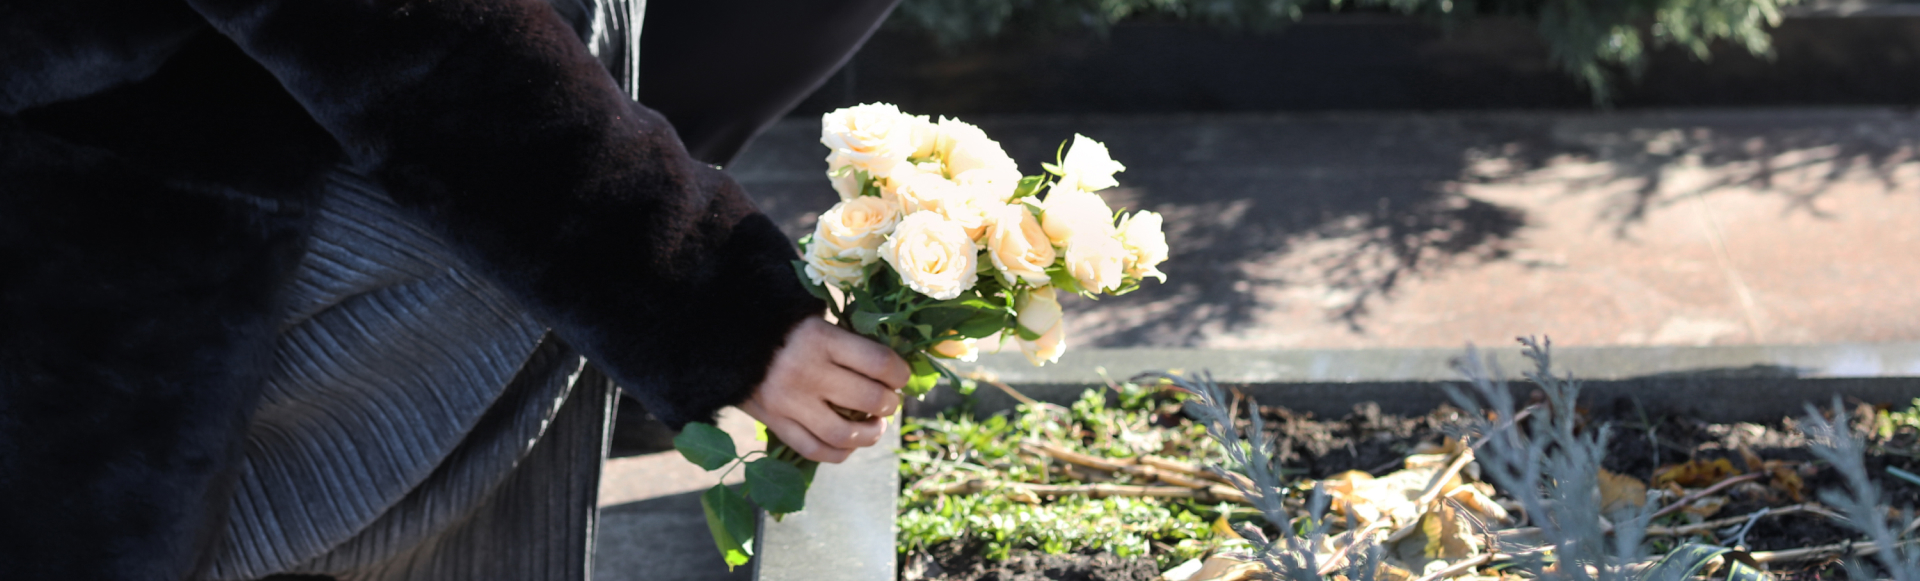 Couple putting flowers on grave of their relative at funeral